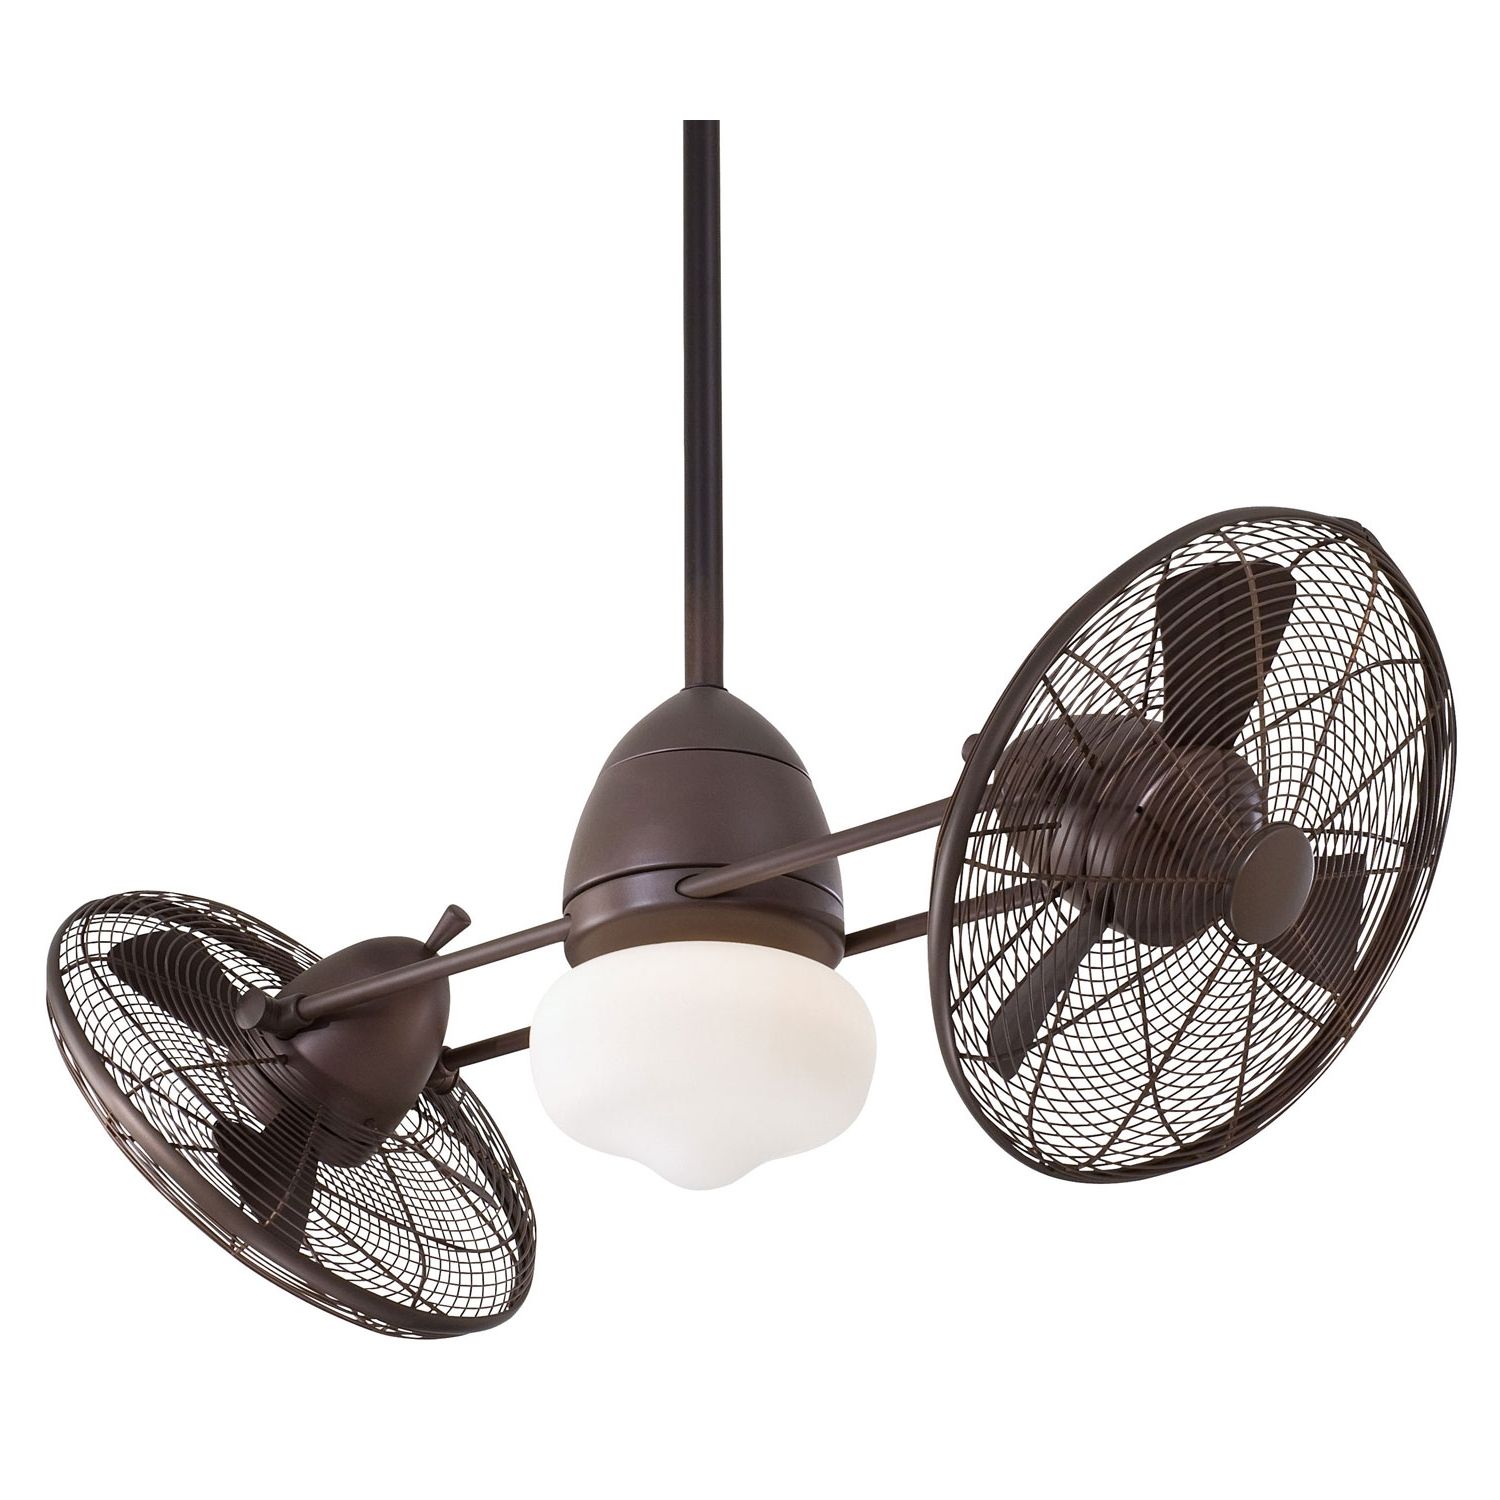 2018 Outdoor Ceiling Fan Lights With Regard To Minka Aire 42 Inch Gyro Wet Indoor/outdoor Oil Rubbed Bronze Ceiling (View 3 of 20)